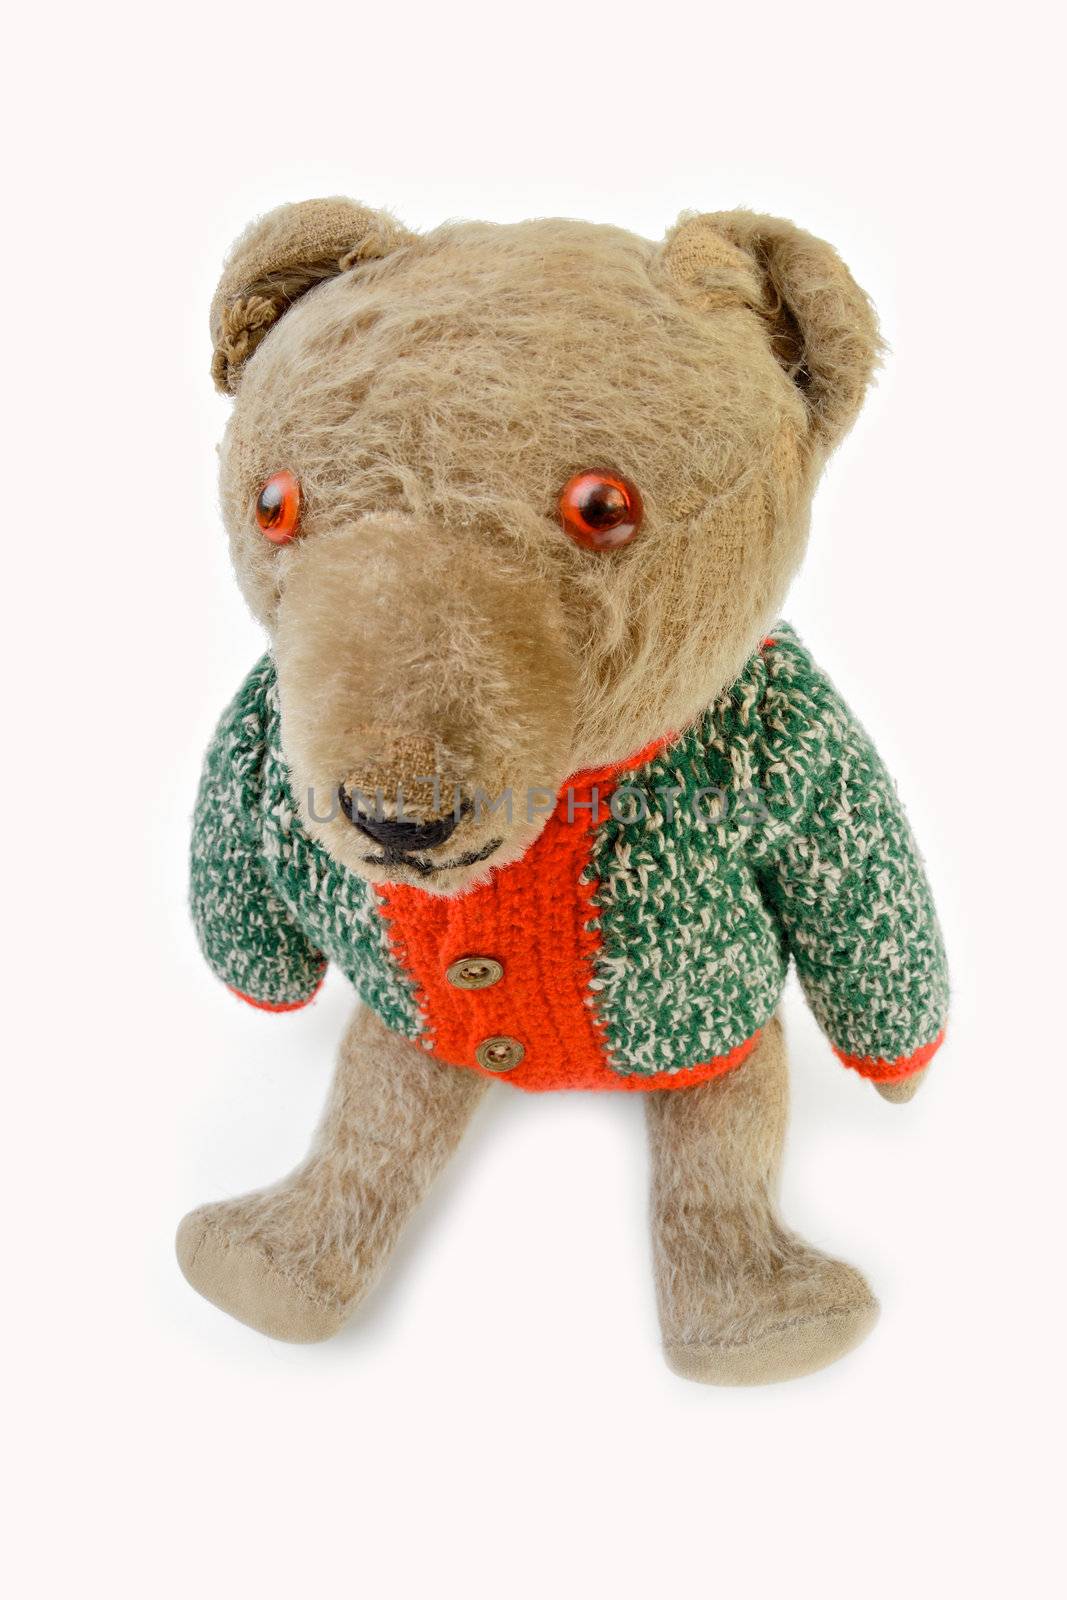 Plush teddy bear dressed in knitted sweater